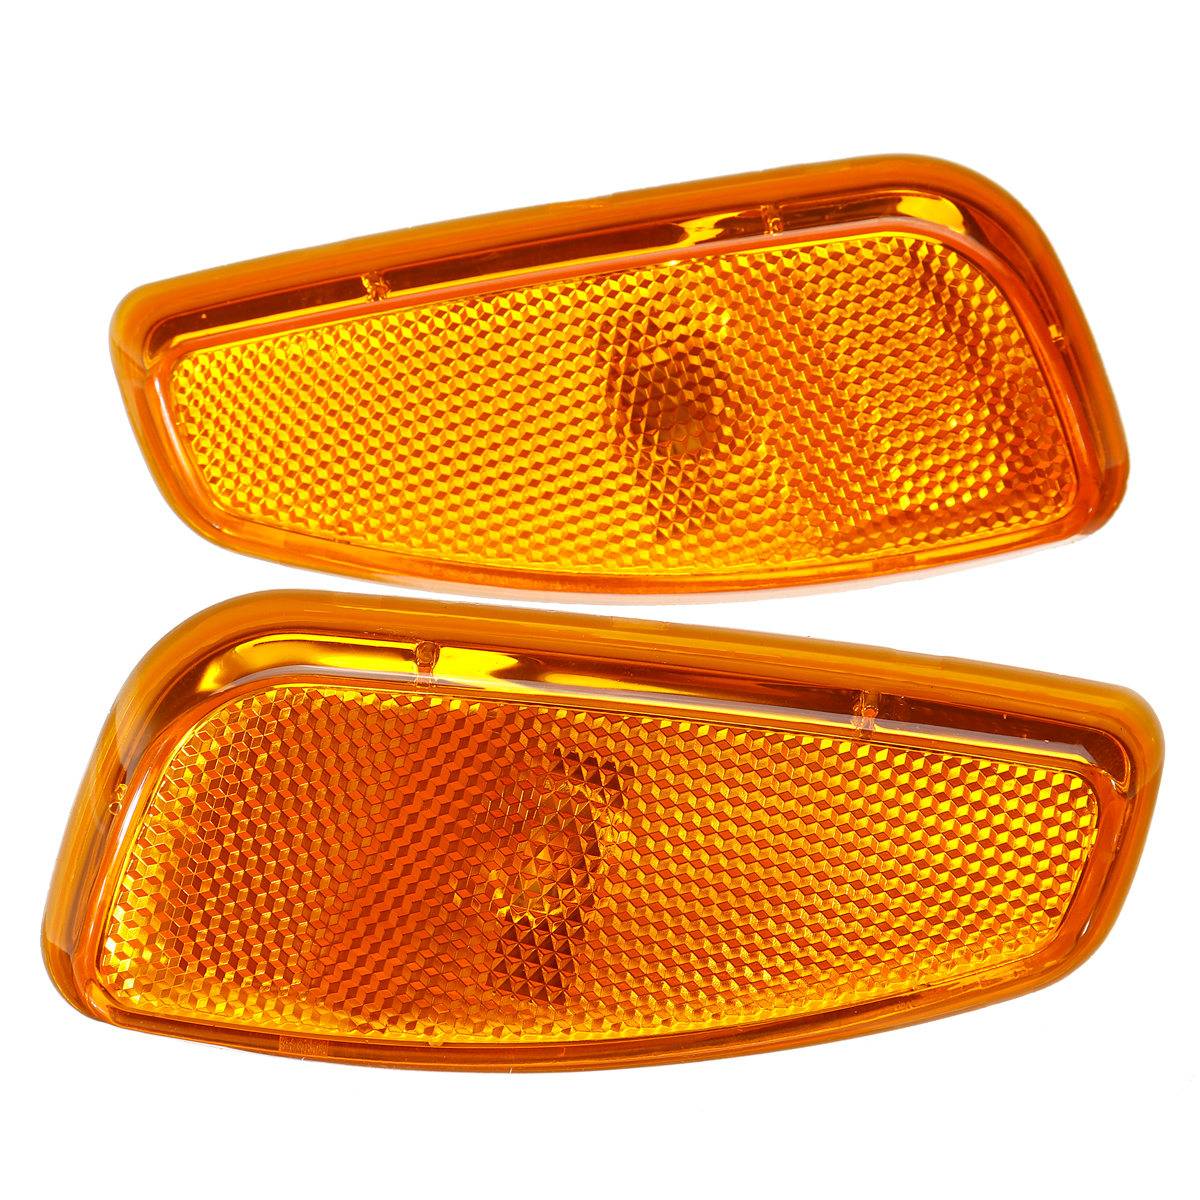 2Pcs Car Side Marker Lights Indicator Lamps with Cable Cover for Jeep Renegade 2015-2017